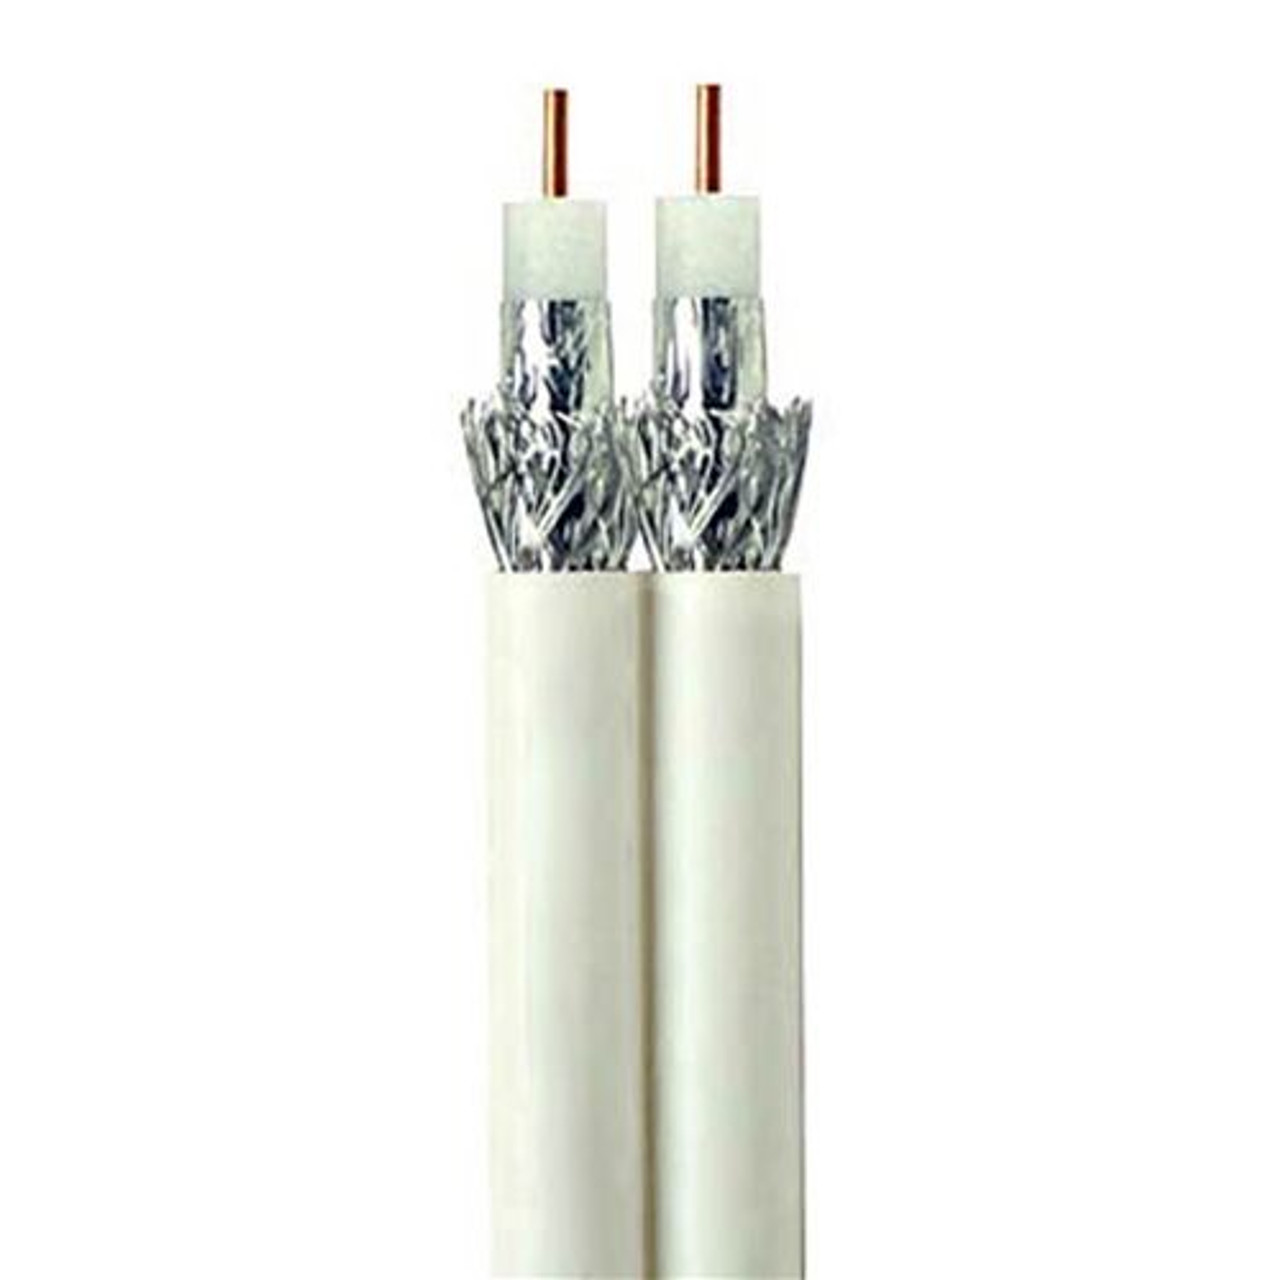 Steren 200-948WH-100 Dual RG6 Coaxial Cable 100' FT White 3GHz CCS 18 AWG UL Dual Coaxial Cable Wire HDTV Satellite Center 60% Braid Dual RG-6 Copper Clad, Part # 200948-WH-100